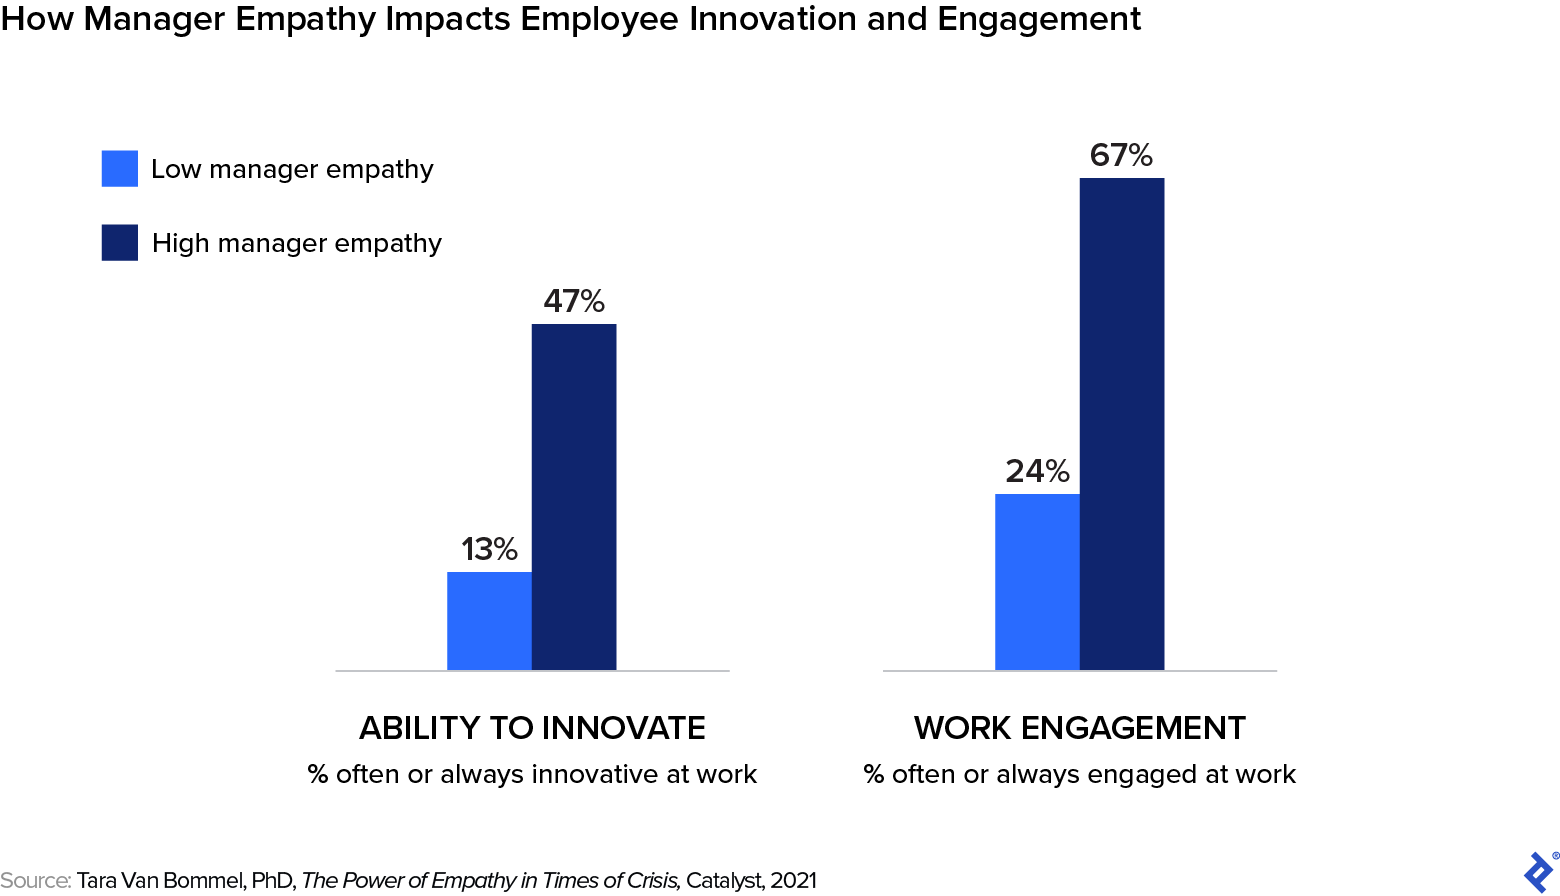 Manager empathy increases employeesâ ability to innovate and their work engagement.